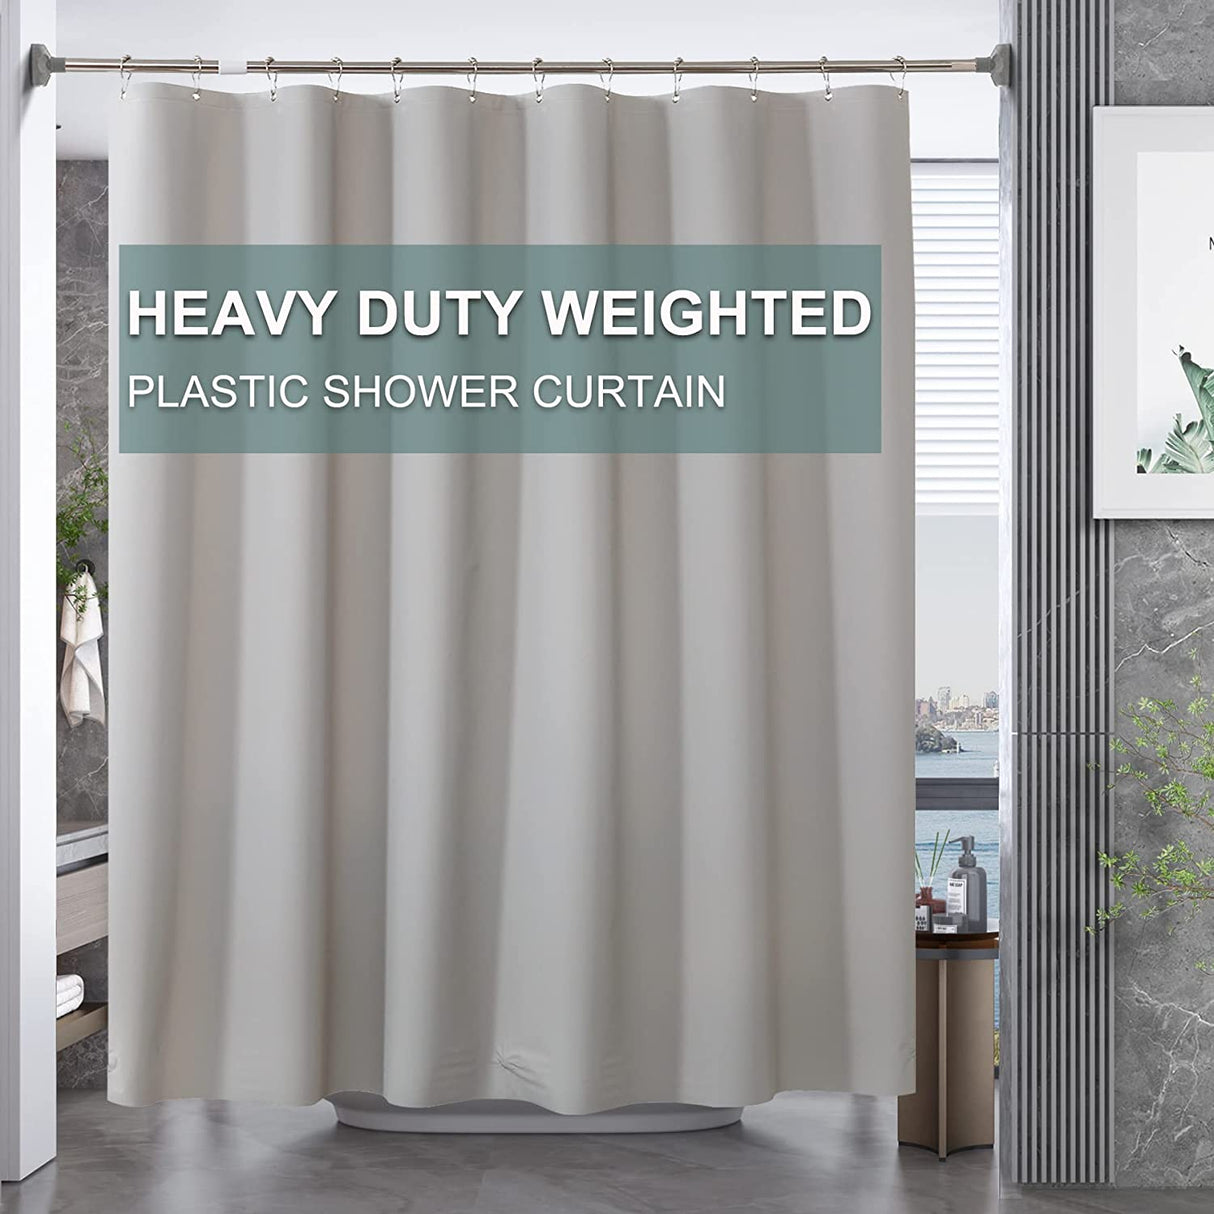 AmazerBath 8G EVA Plastic Shower Curtain Line with Clear Weights and Rustproof Grommet Holes